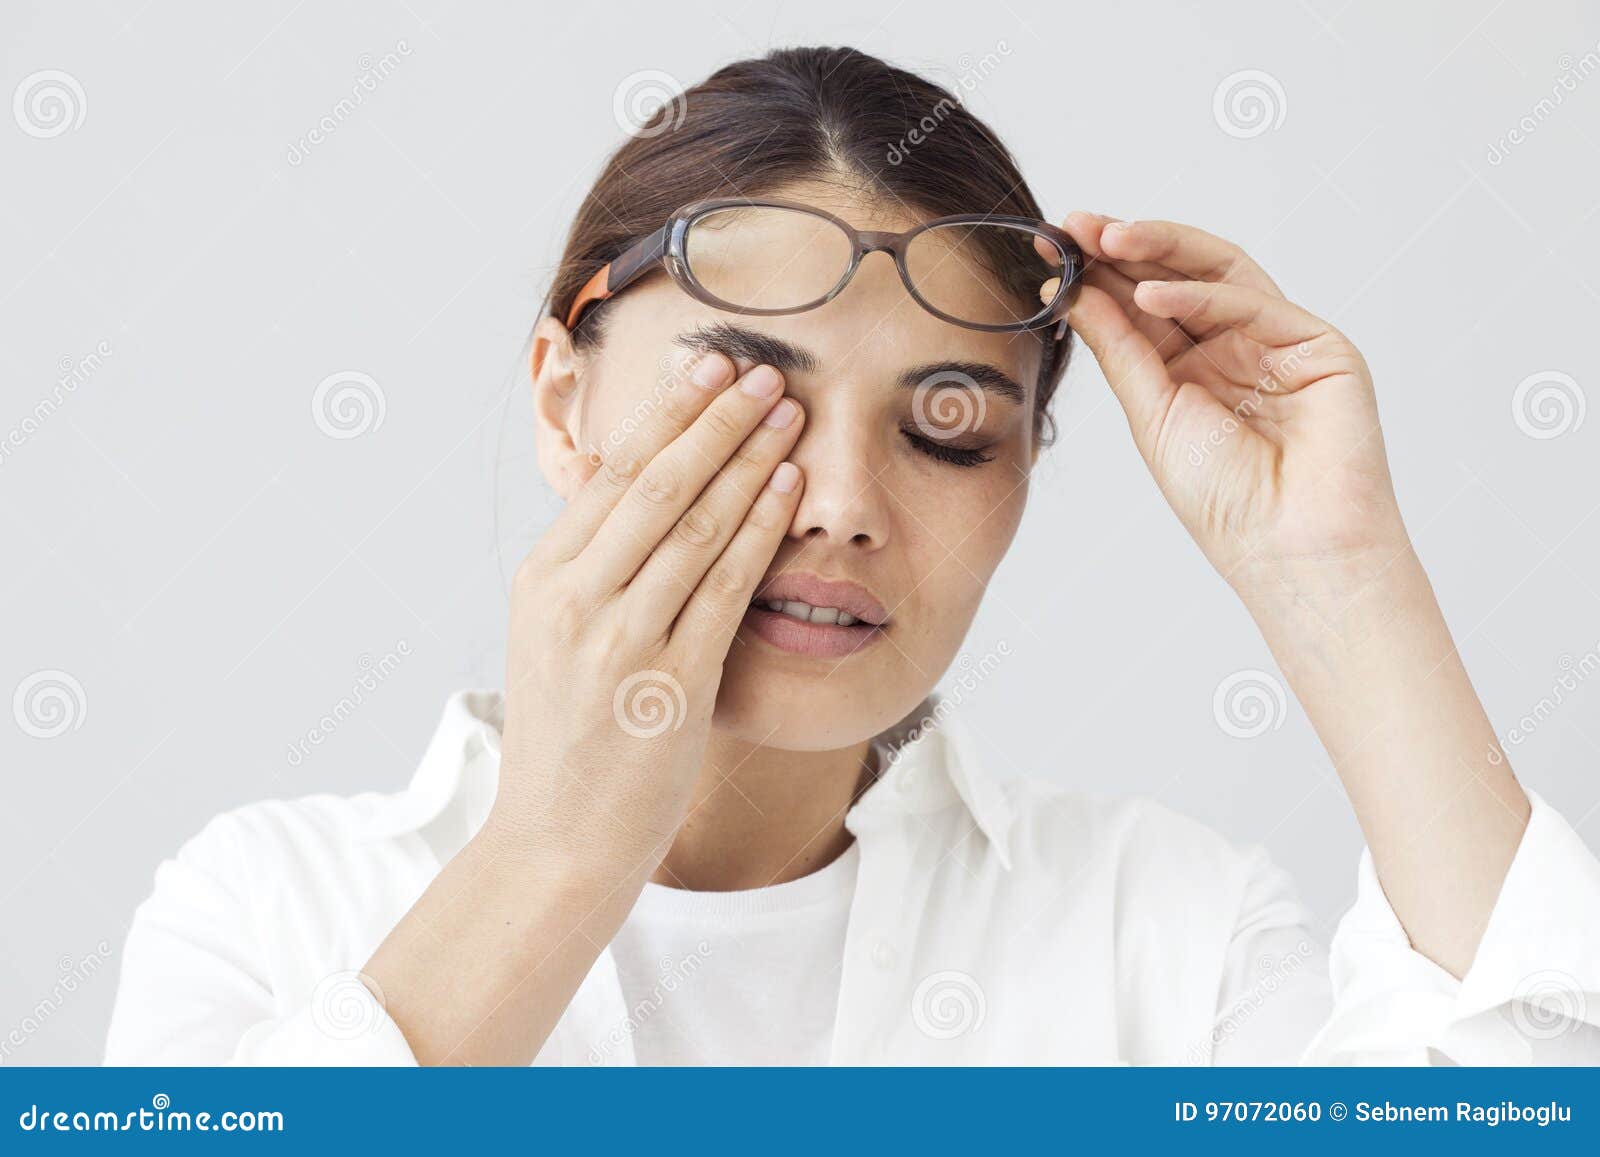 young woman with eye fatigue